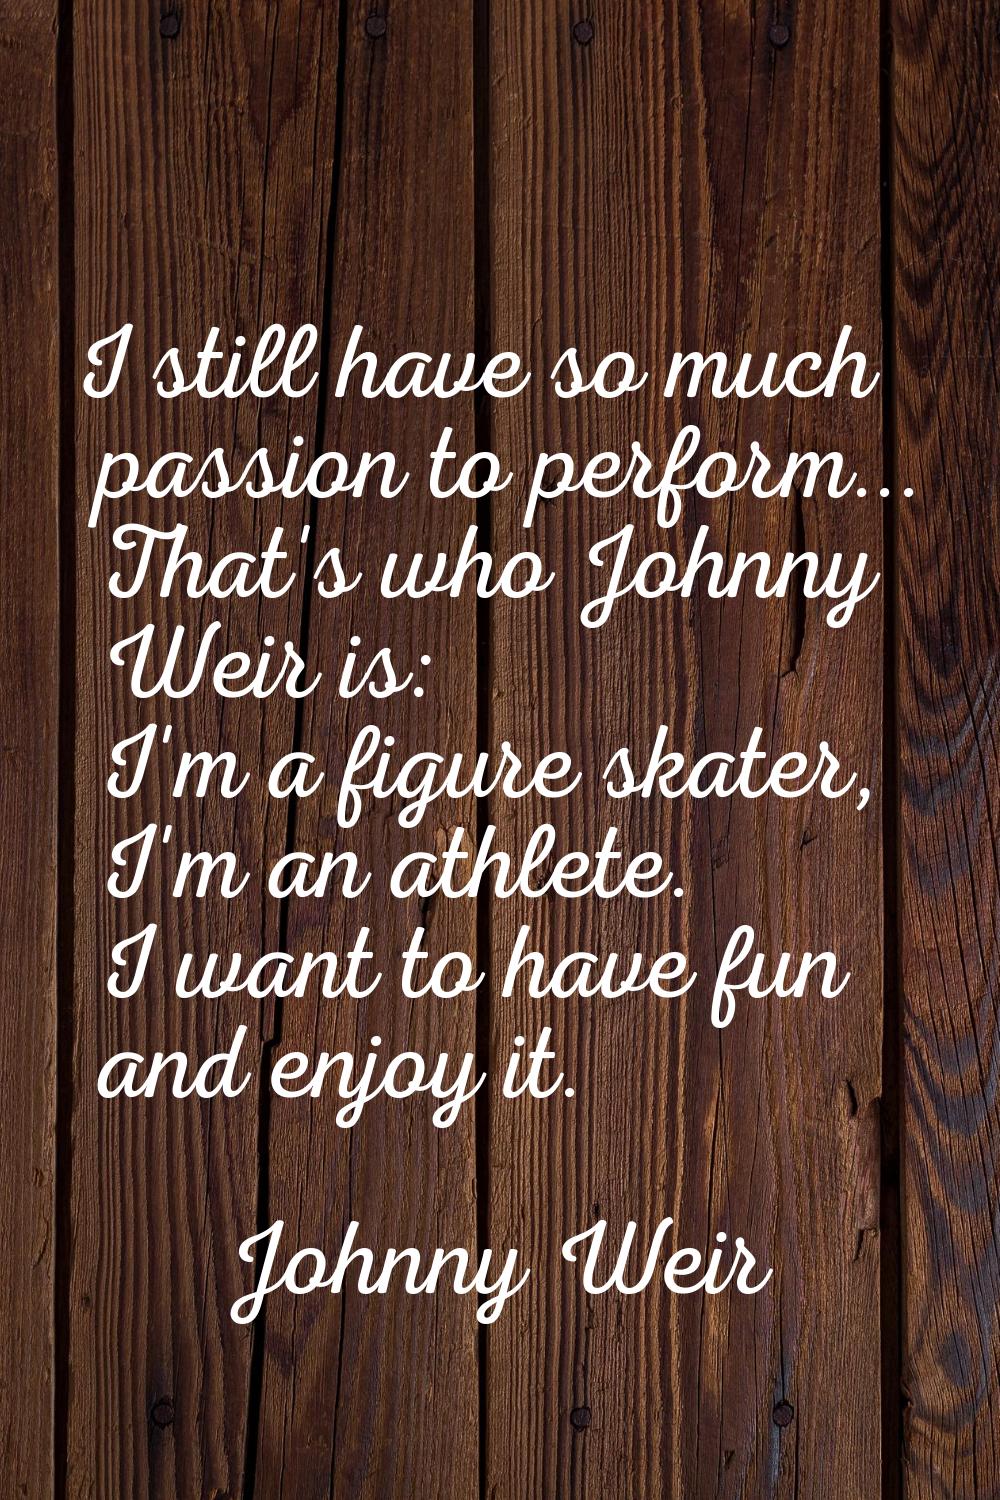 I still have so much passion to perform... That's who Johnny Weir is: I'm a figure skater, I'm an a